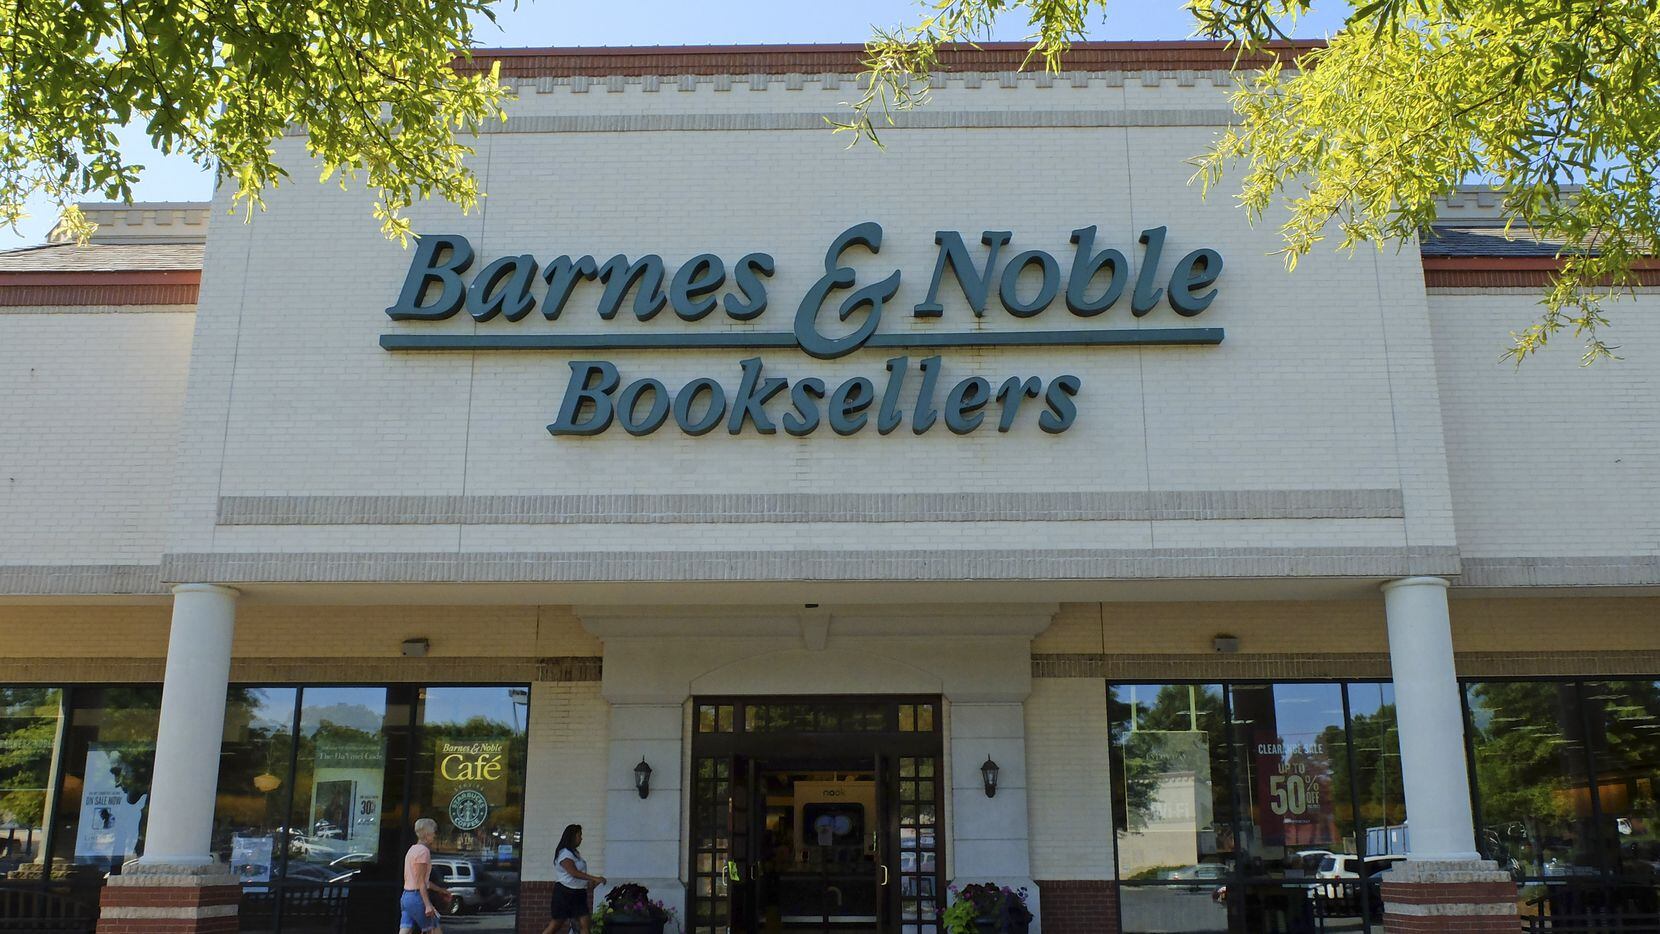 Barnes & Noble has been in the Preston Royal Village shopping center for 15 years.